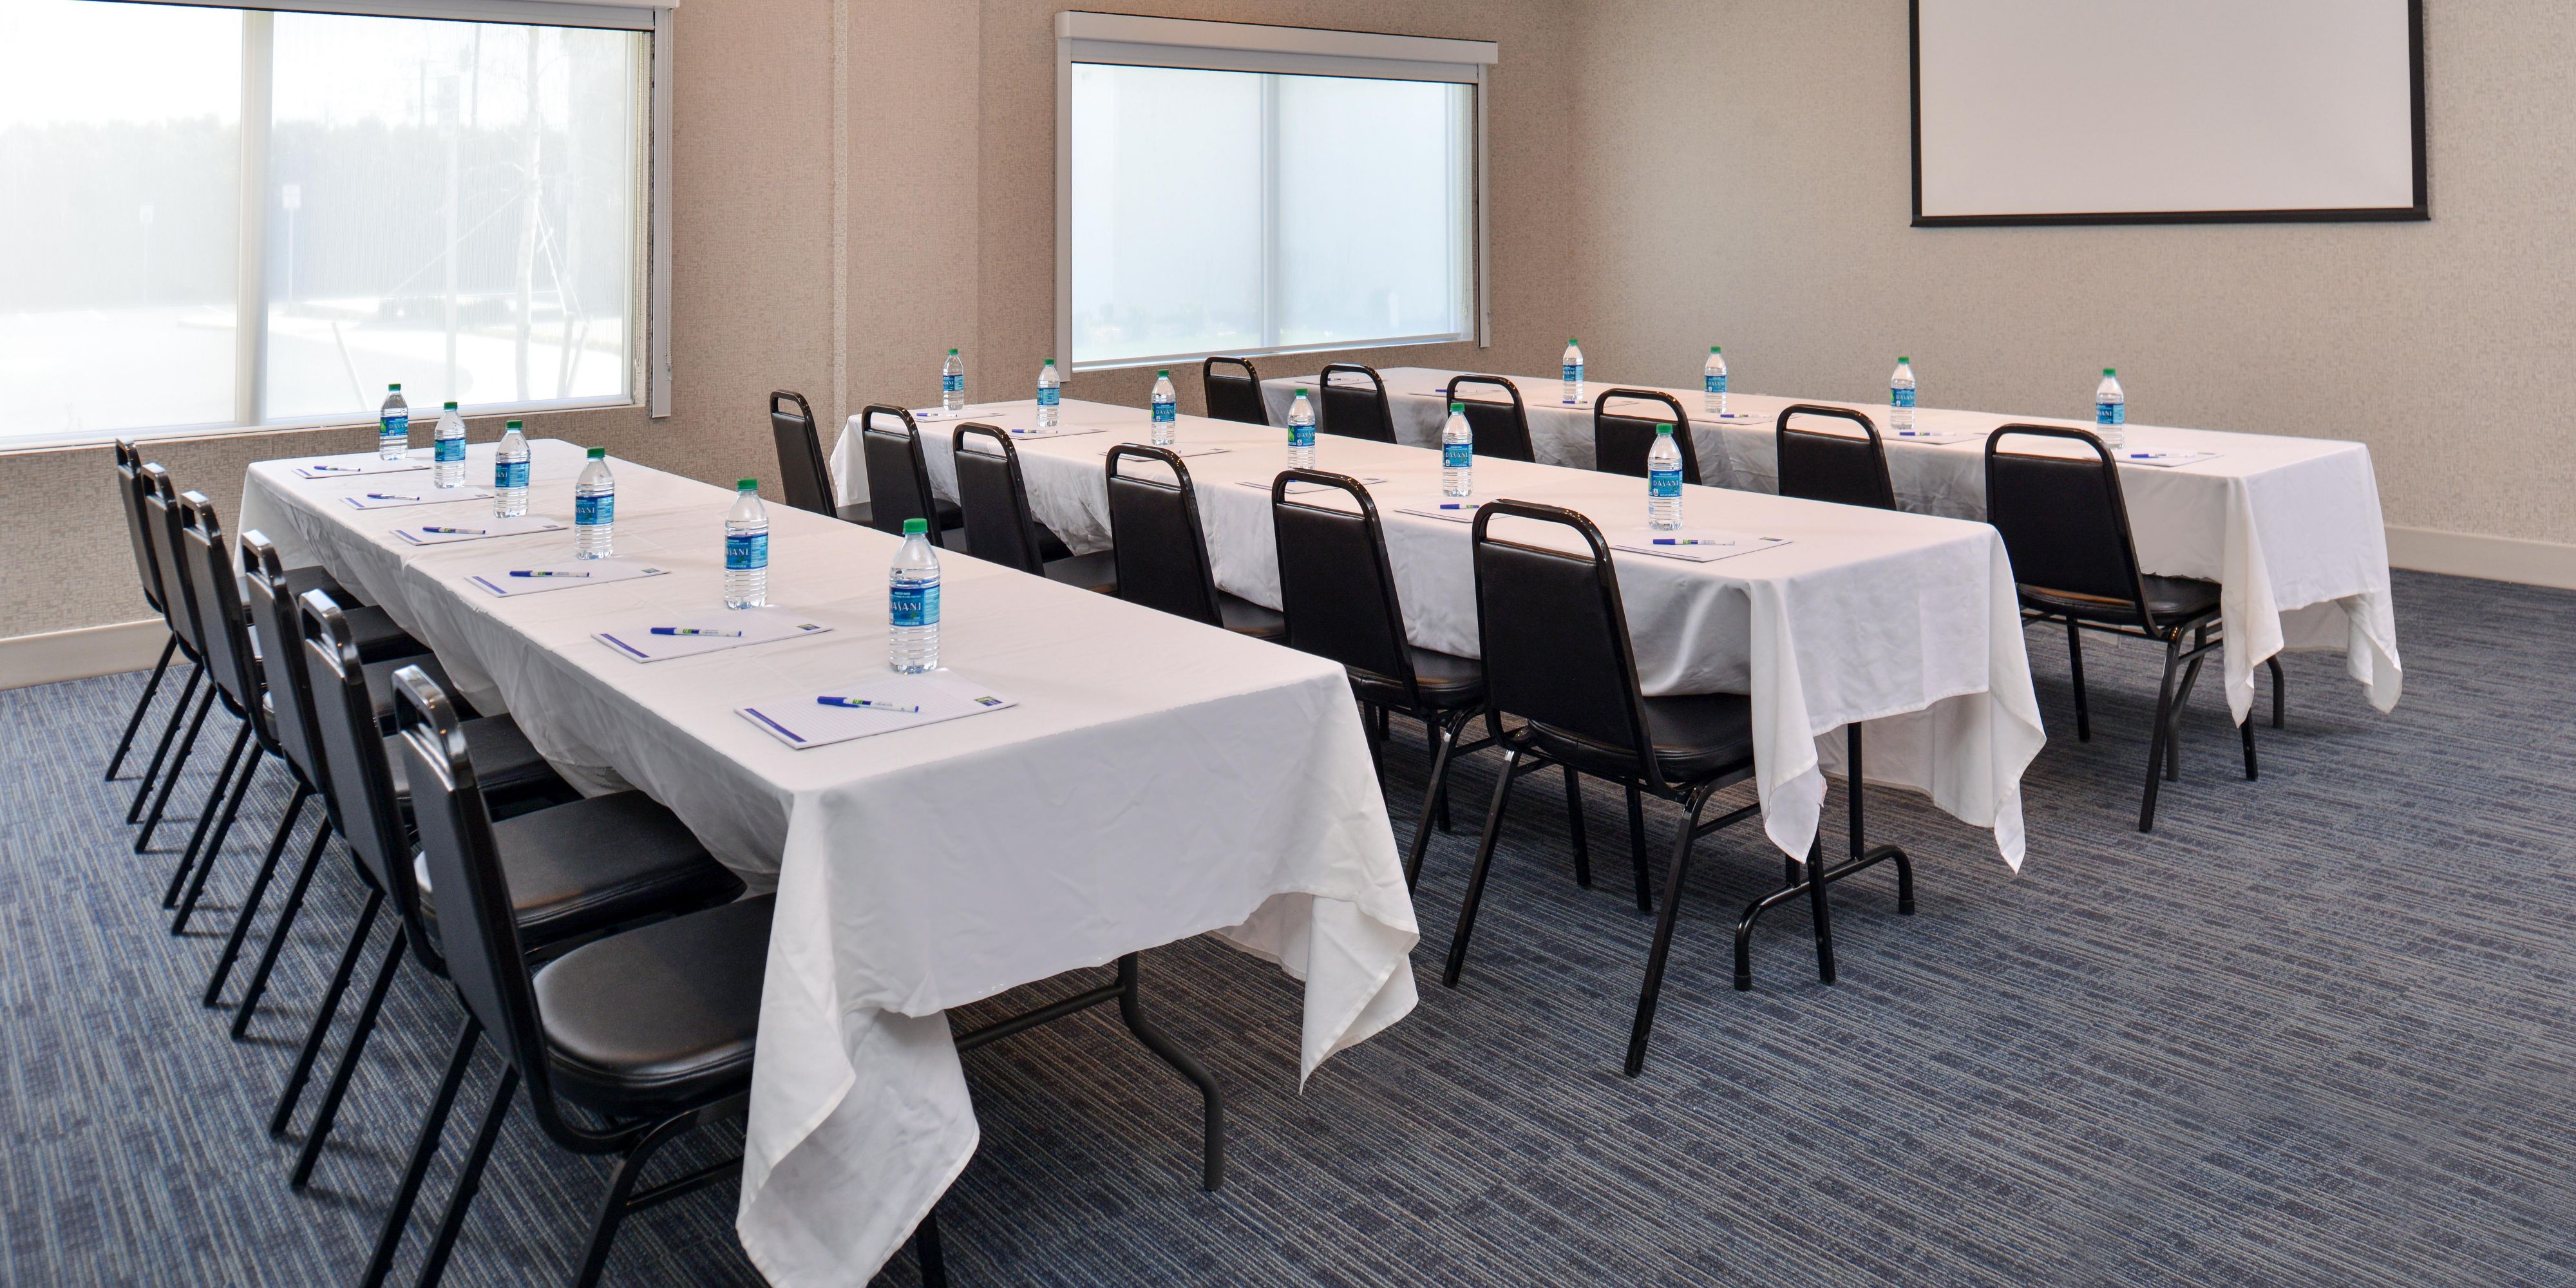 Have your next meeting or function with us in our spacious meeting facilities!  Two meeting rooms to seat up to 45 people - Classroom, U-shape and L-shape.  For both business and pleasure, choose Holiday Inn Express & Suites Farmington Hills!